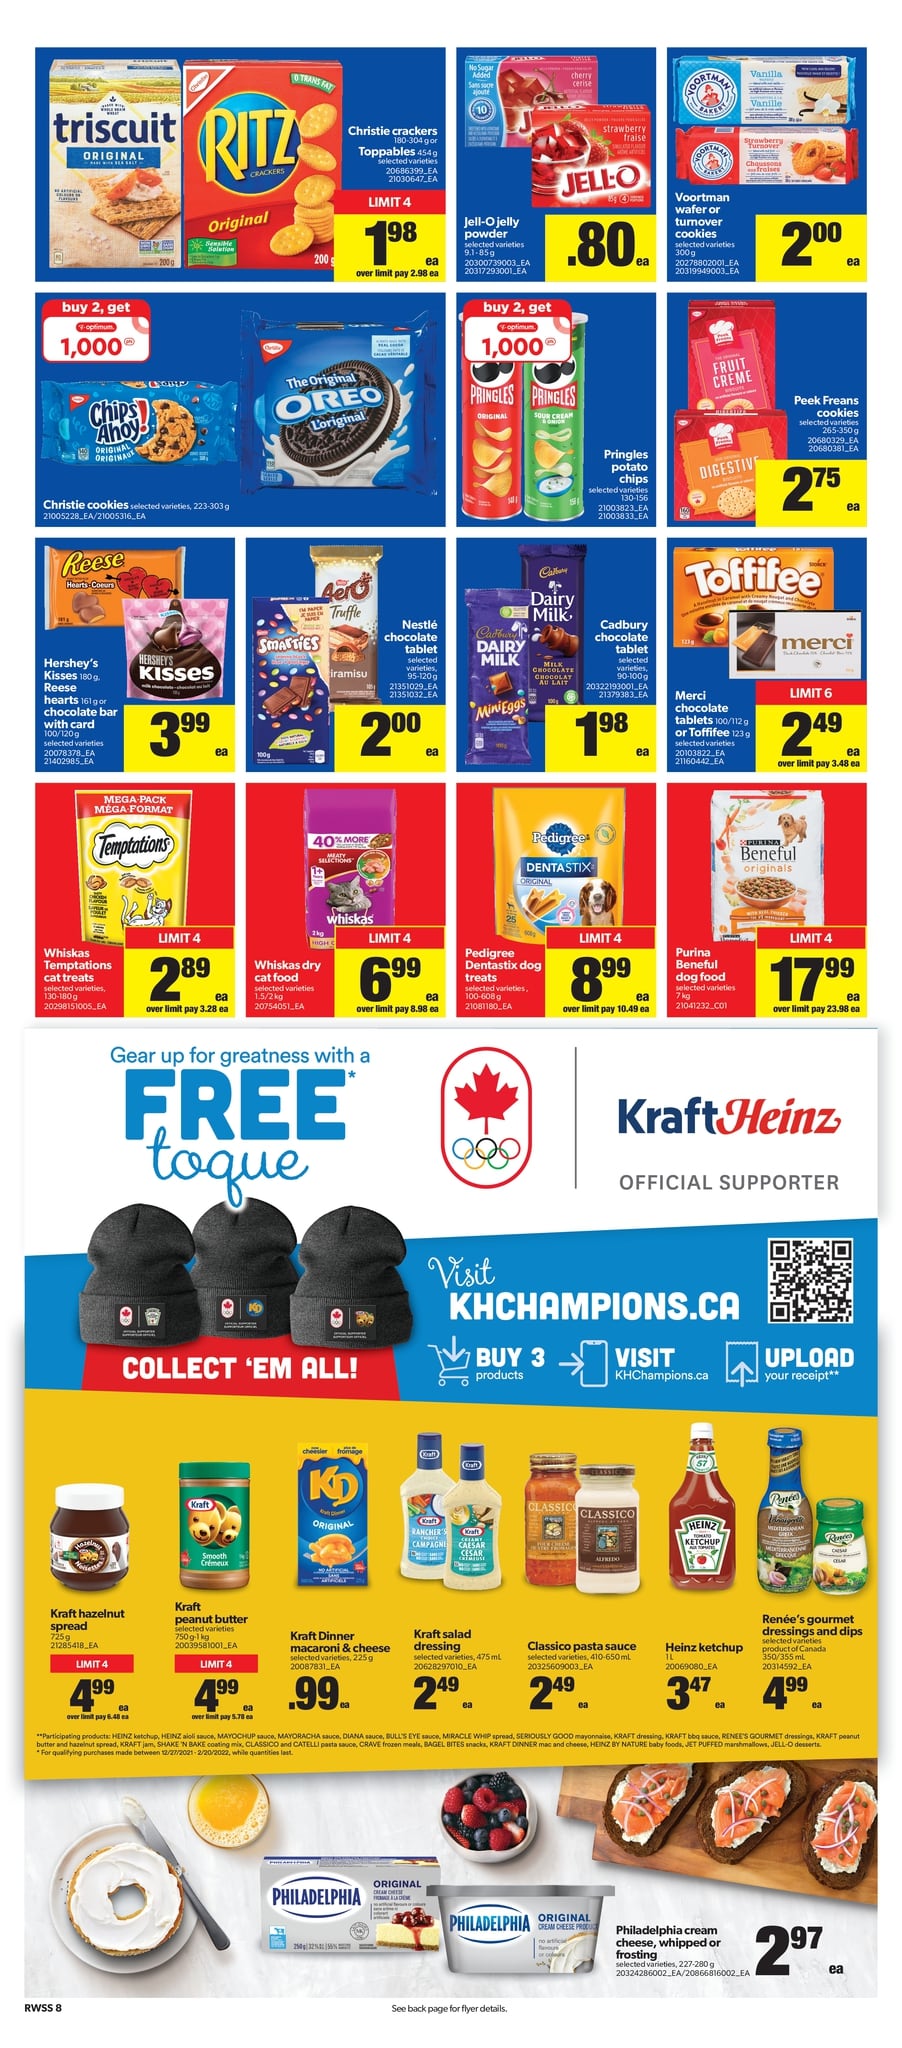 Real Canadian Superstore Western Canada - Weekly Flyer Specials - Page 9